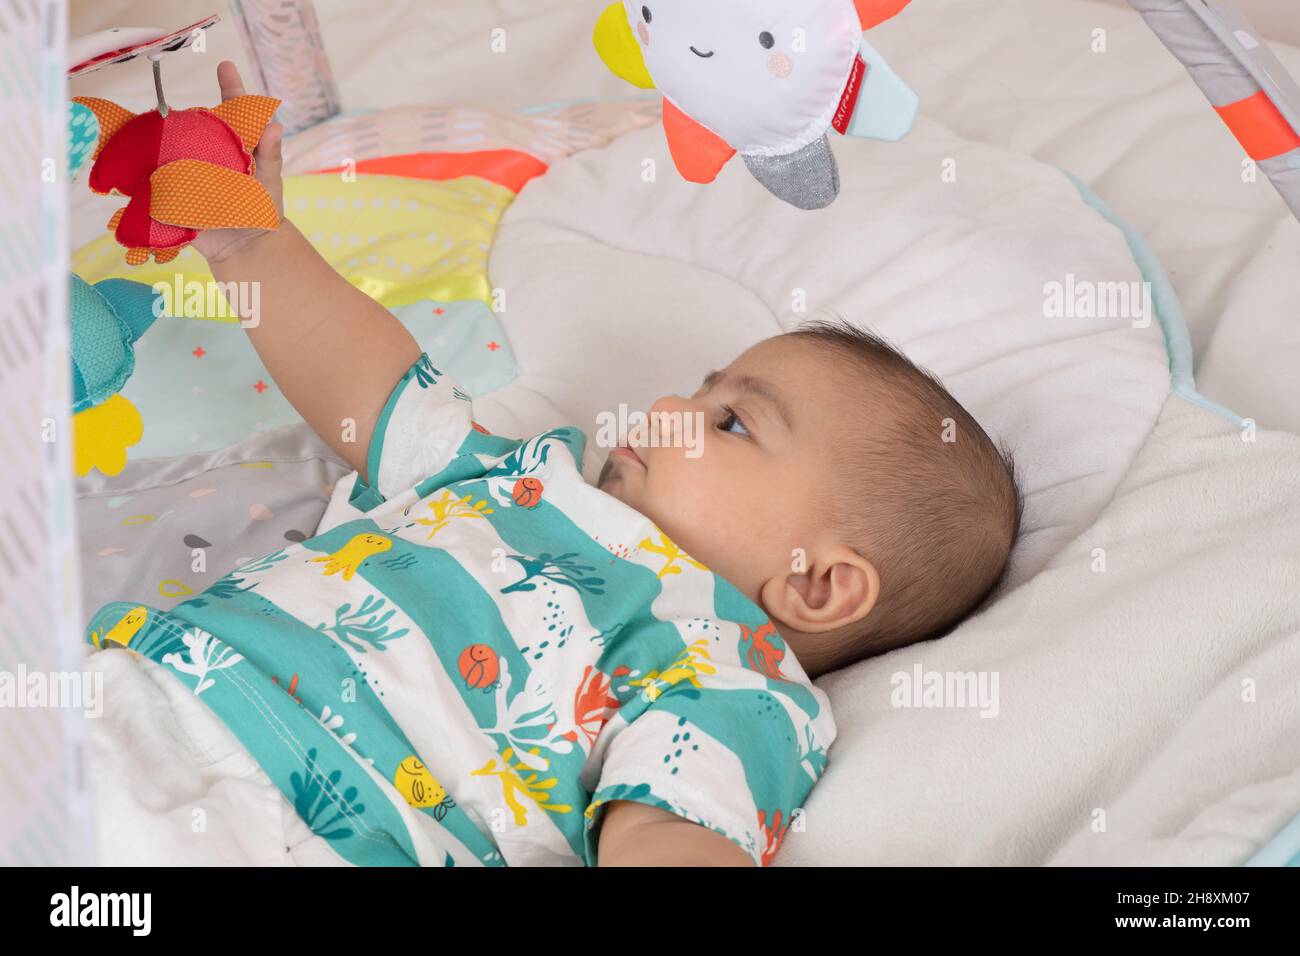 3 month old baby boy on back reaching for and touching toy hanging from toy bar Stock Photo